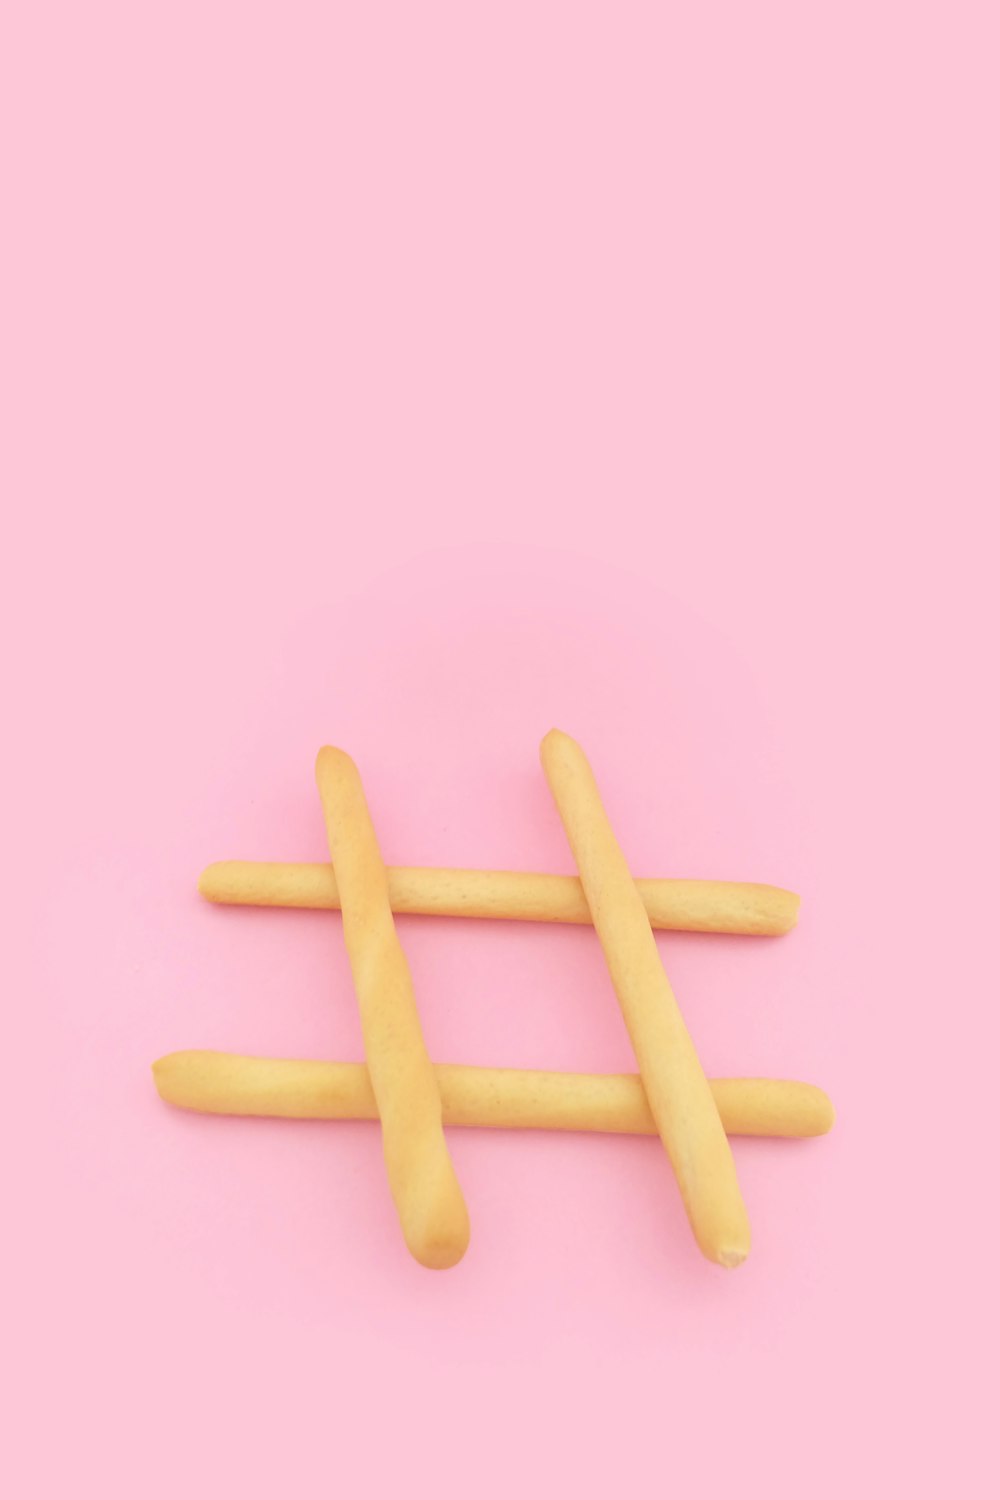 four brown wooden sticks on pink surface